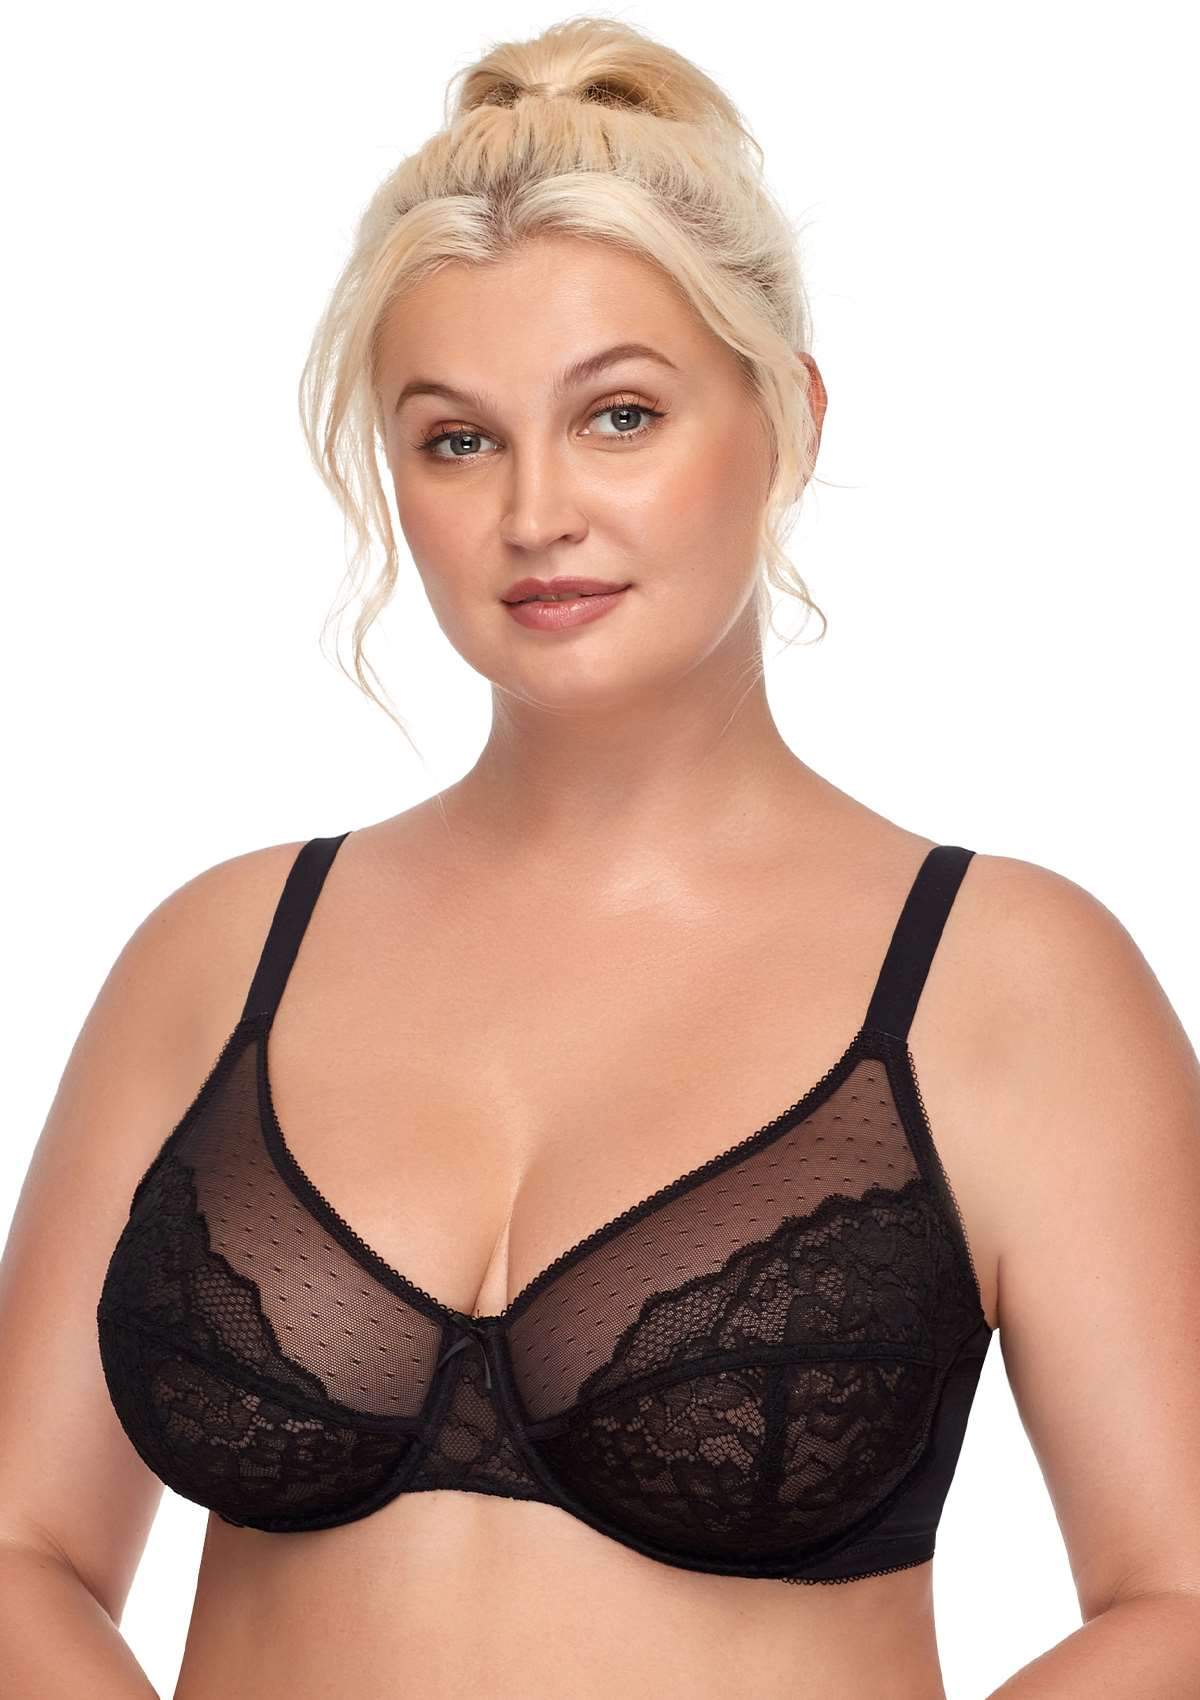 HSIA Enchante Lace Wire Bra For Lifting And Separating Large Breasts - Black / 38 / H